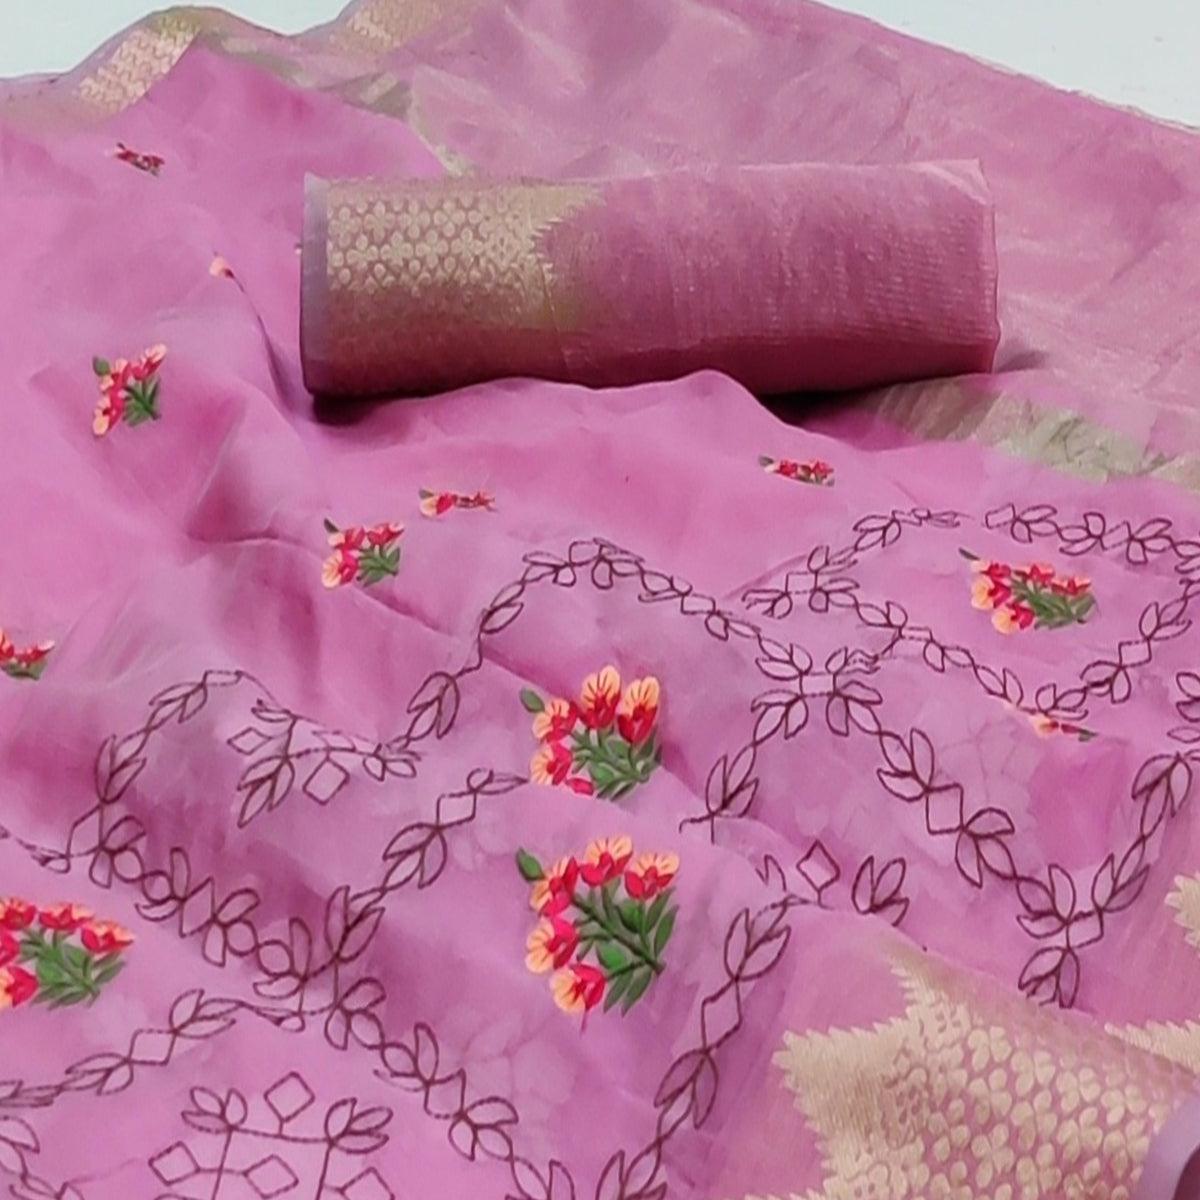 Pink Festive Wear Woven Organza Saree With Floral Embroidery Butta Work - Peachmode